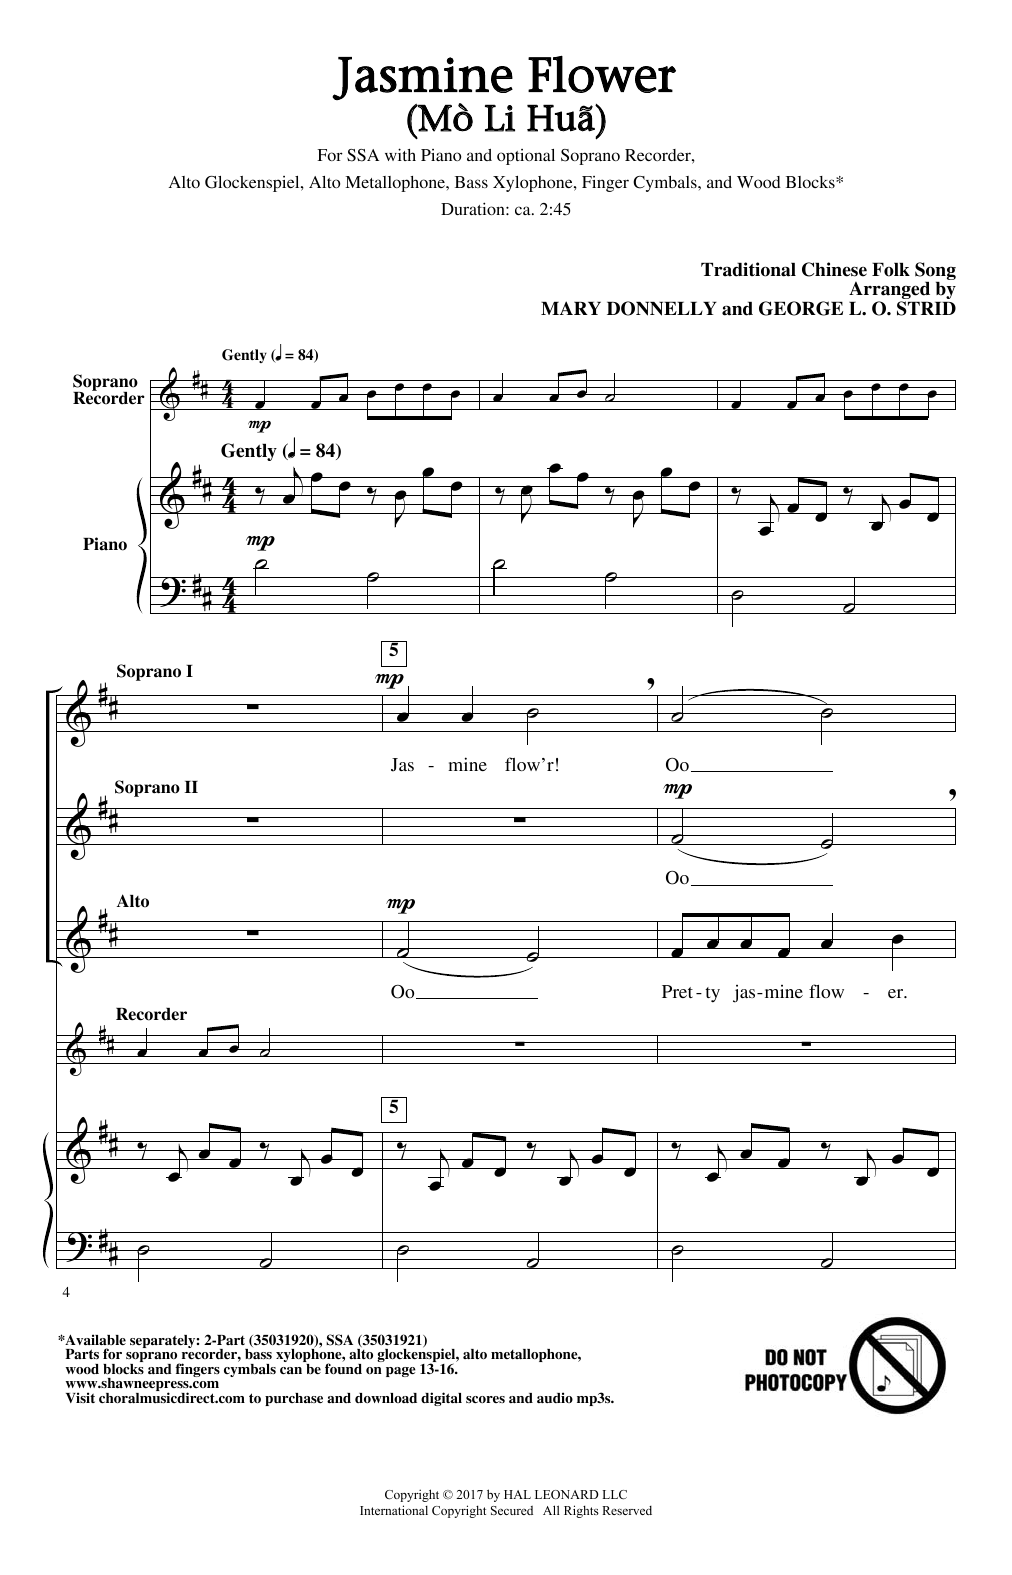 Download Mary Donnelly Jasmine Flower (Mo Li Hua) Sheet Music